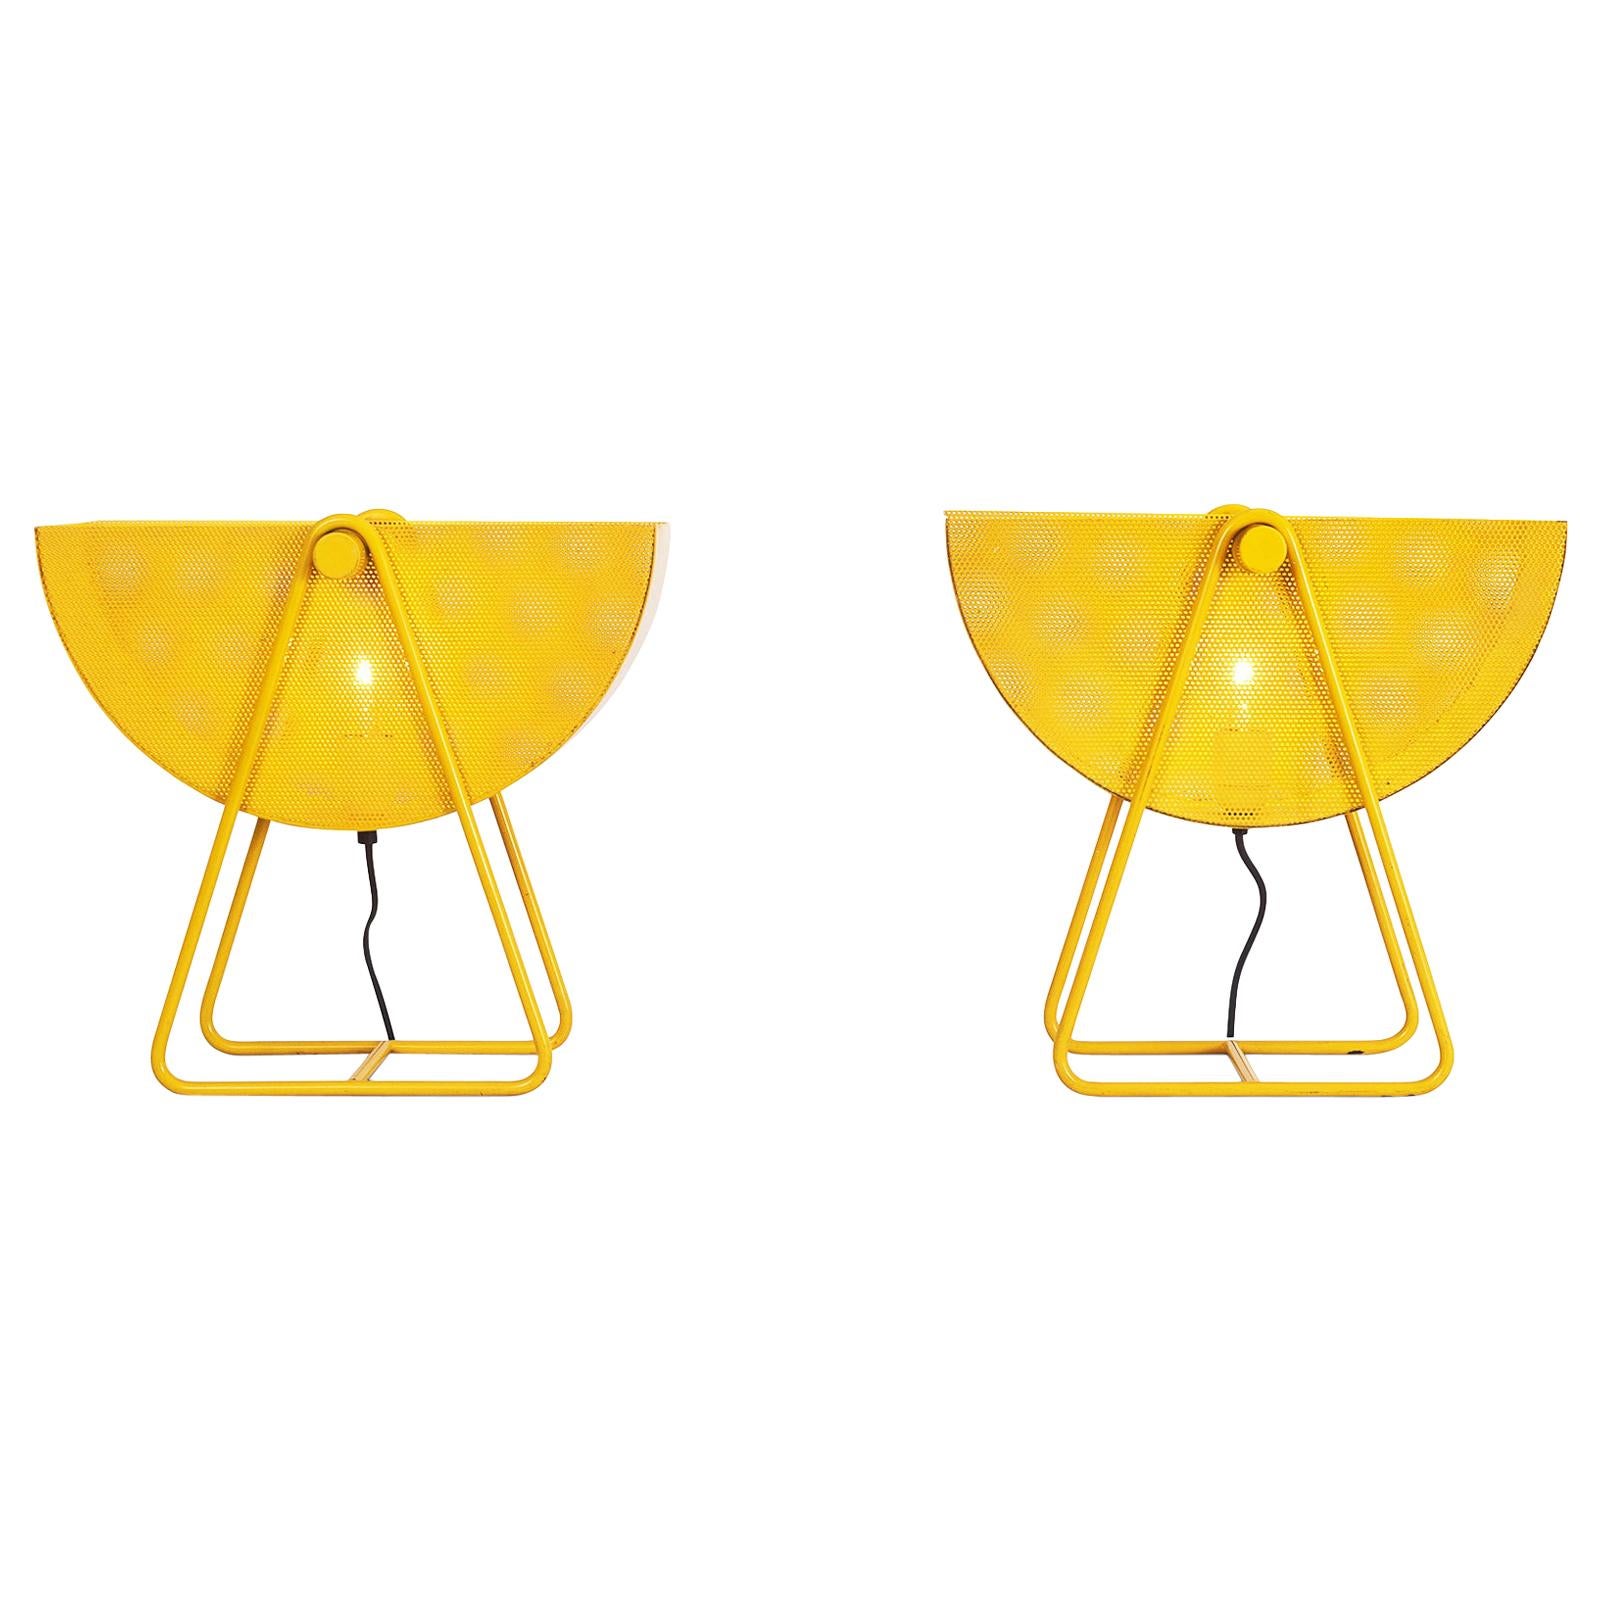 Postmodern Bieffeplast Yellow Table Lamps with Adjustable Shades 